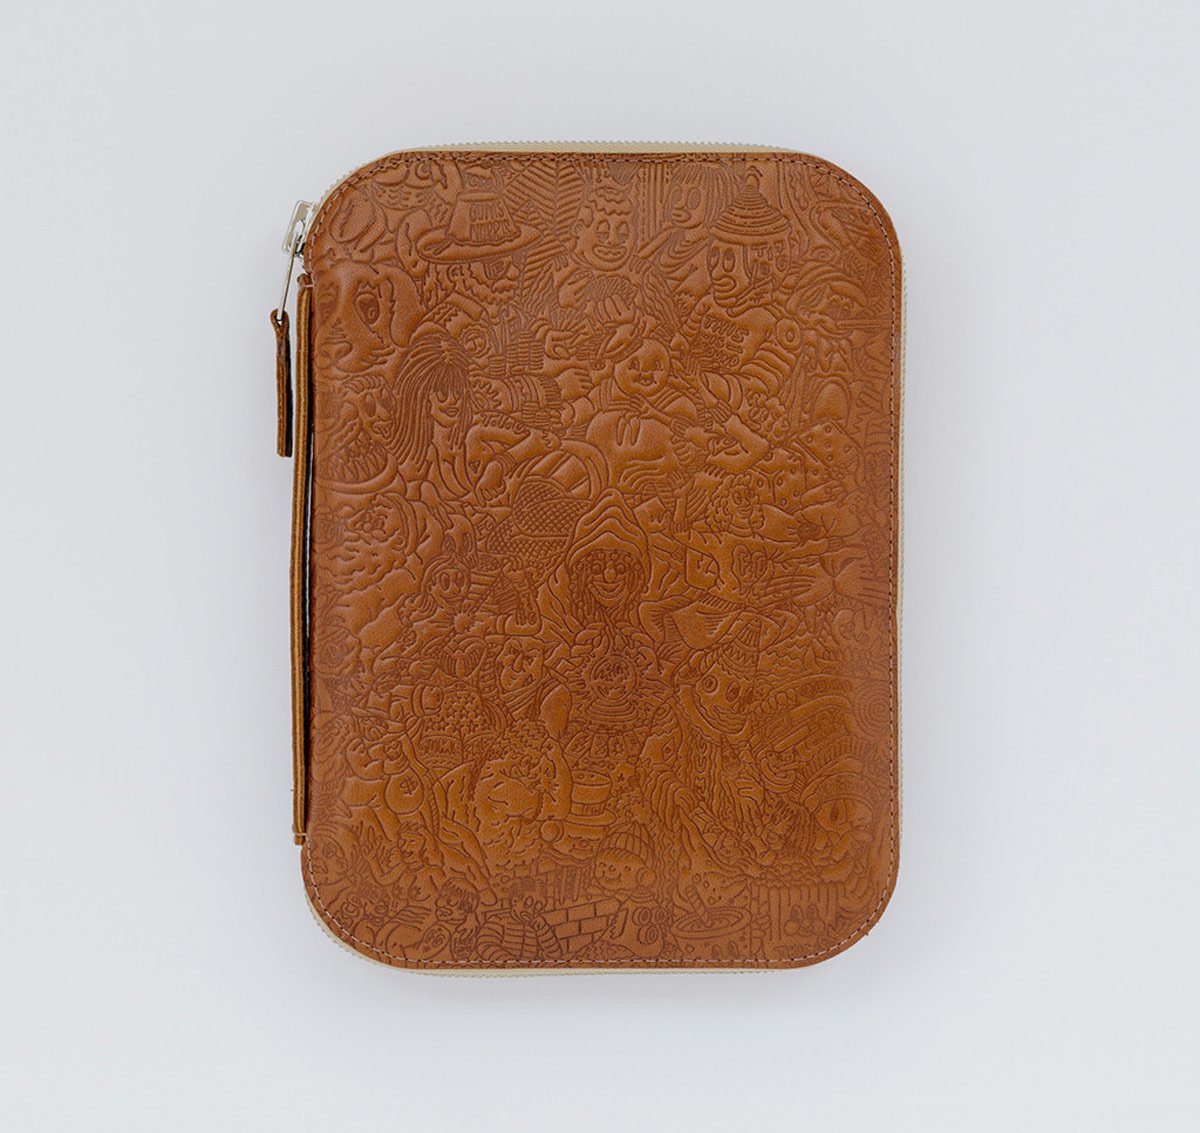 embossed-leather-case-by-this-is-ground-and-freegums-3